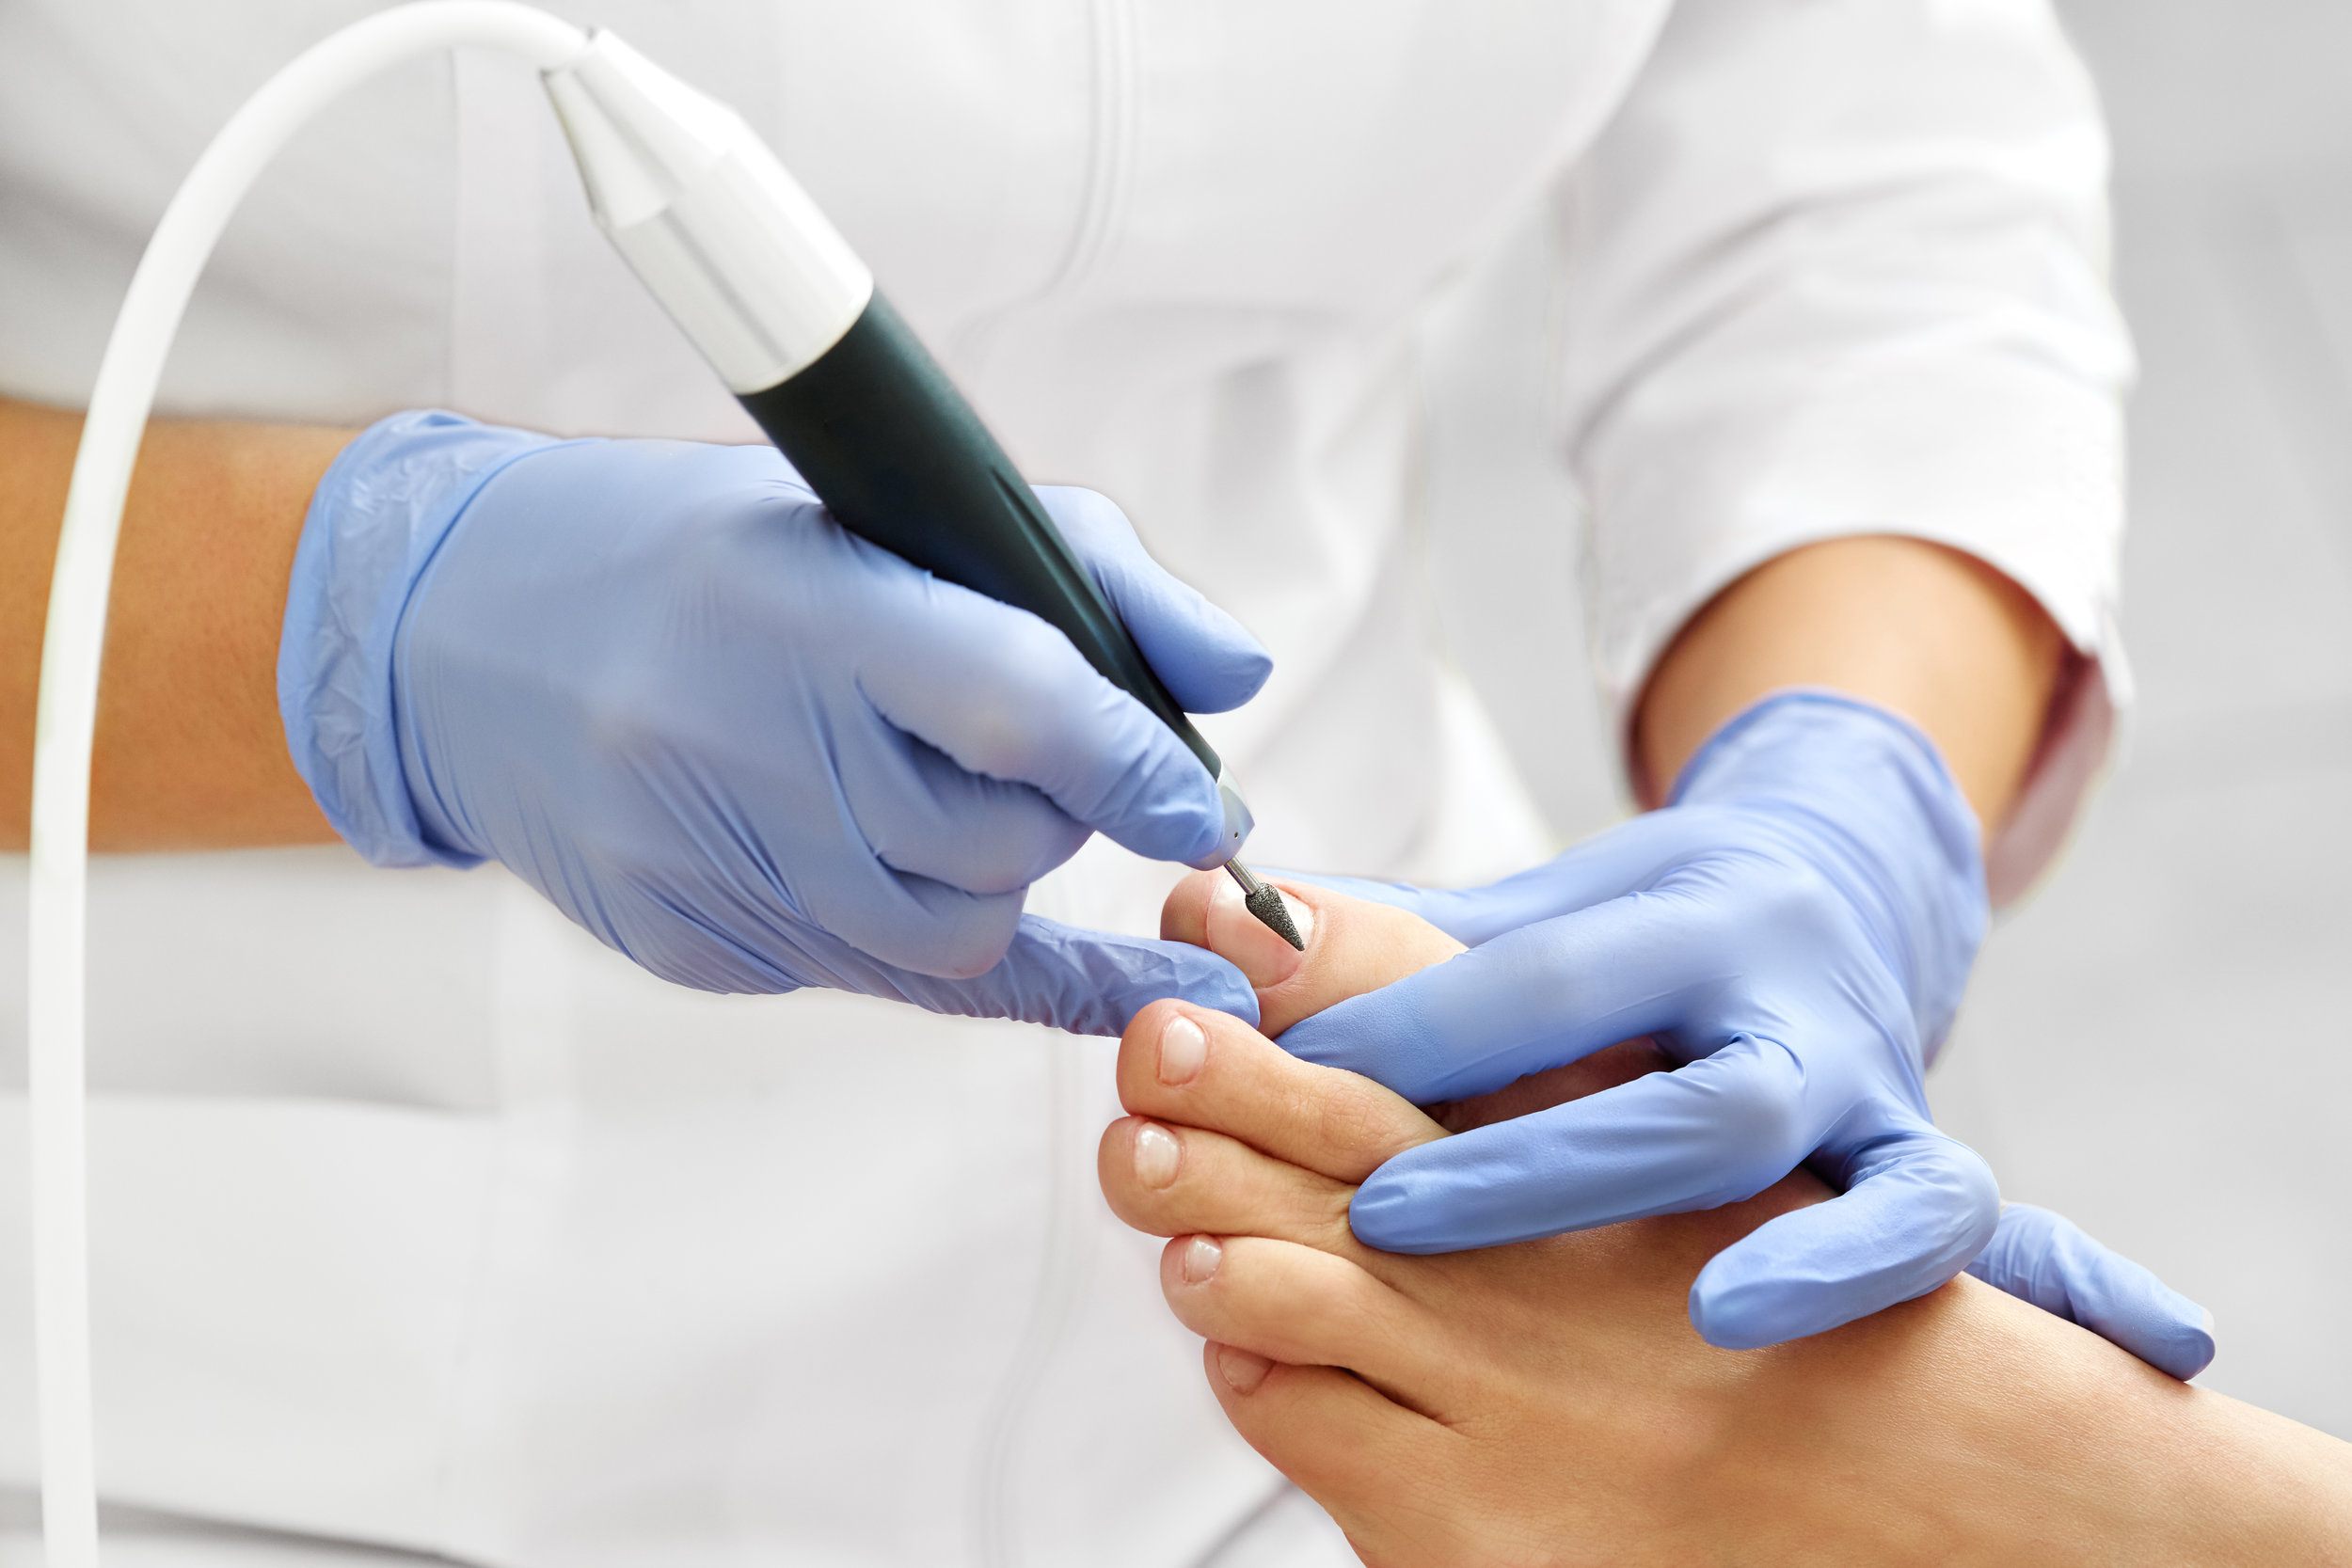 Pedicures for Men, a Complete Guide According to a Podiatrist